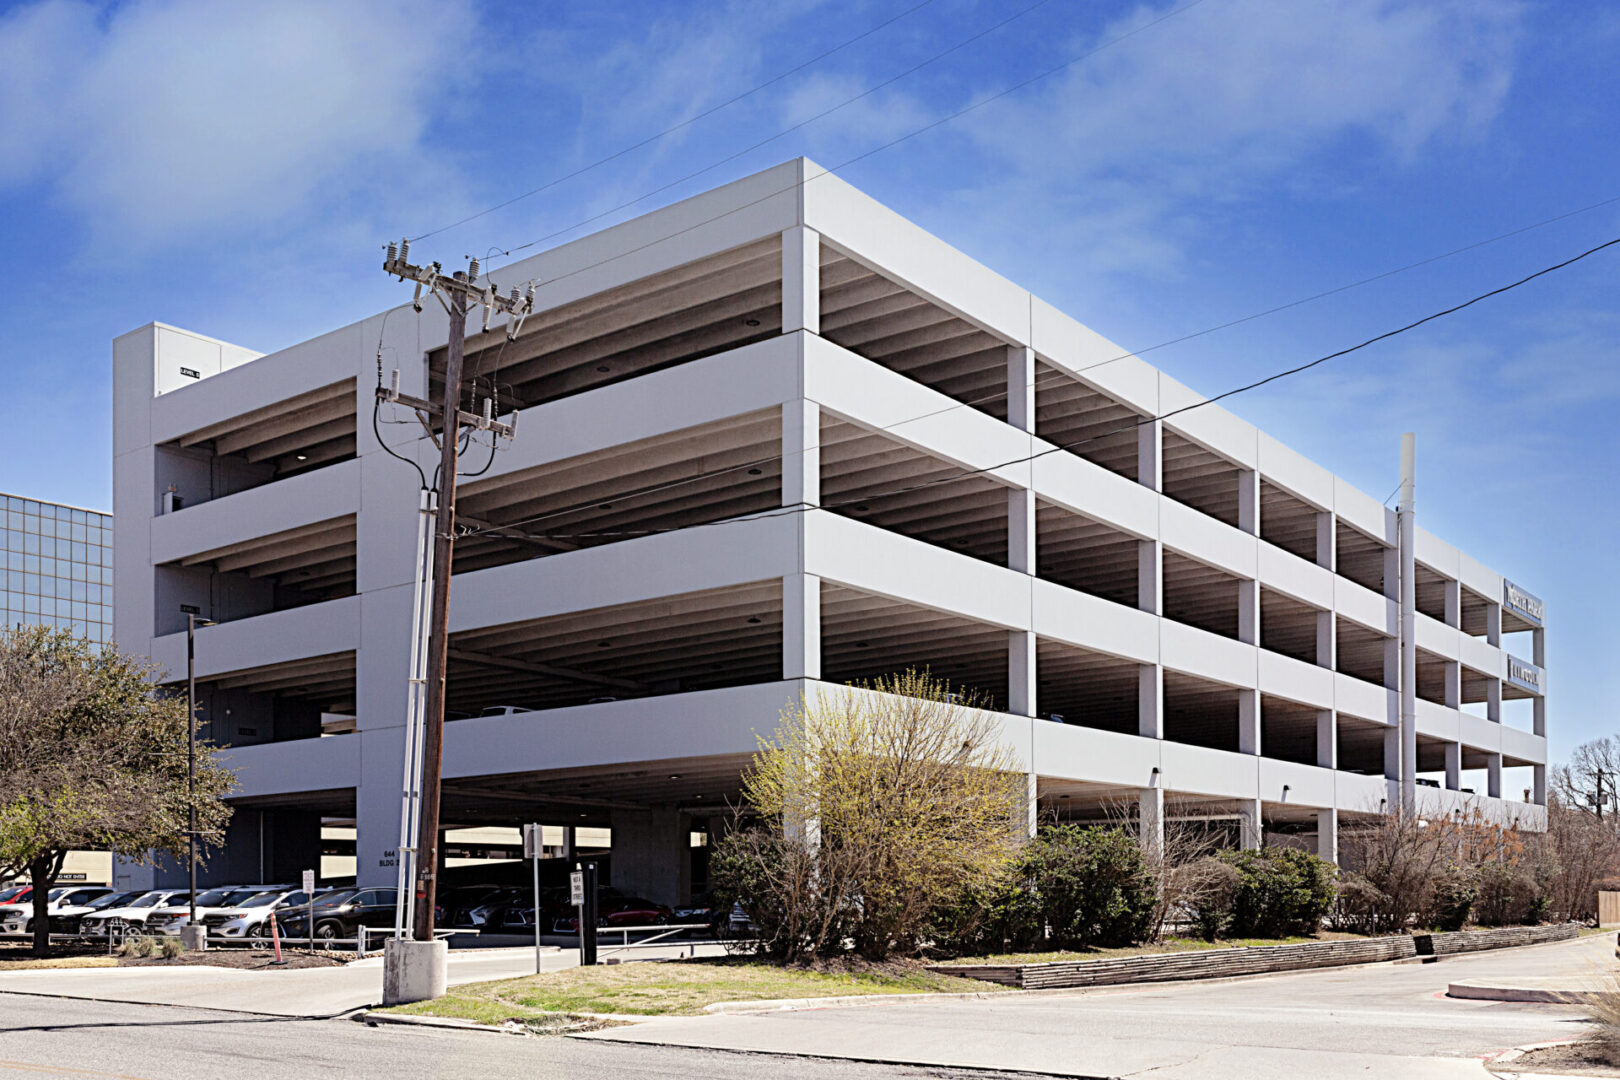 A large parking garage with cars parked in it.